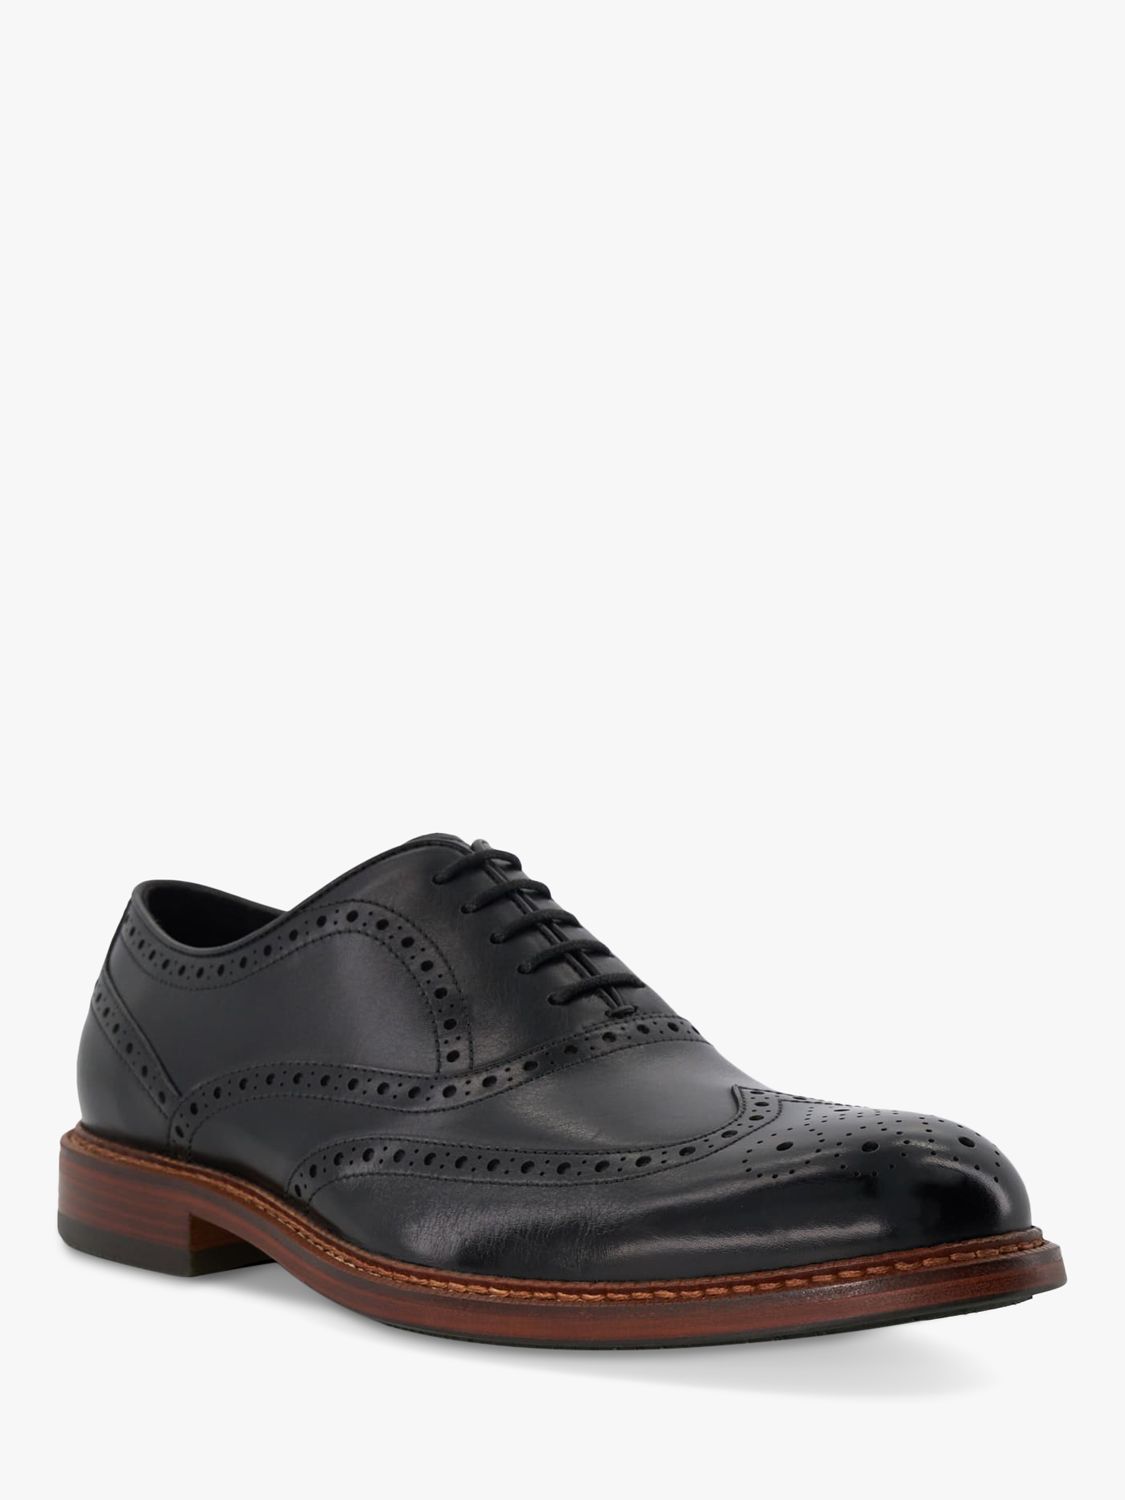 Dune Solihull Brogue Leather Oxford Shoes, Black, 7